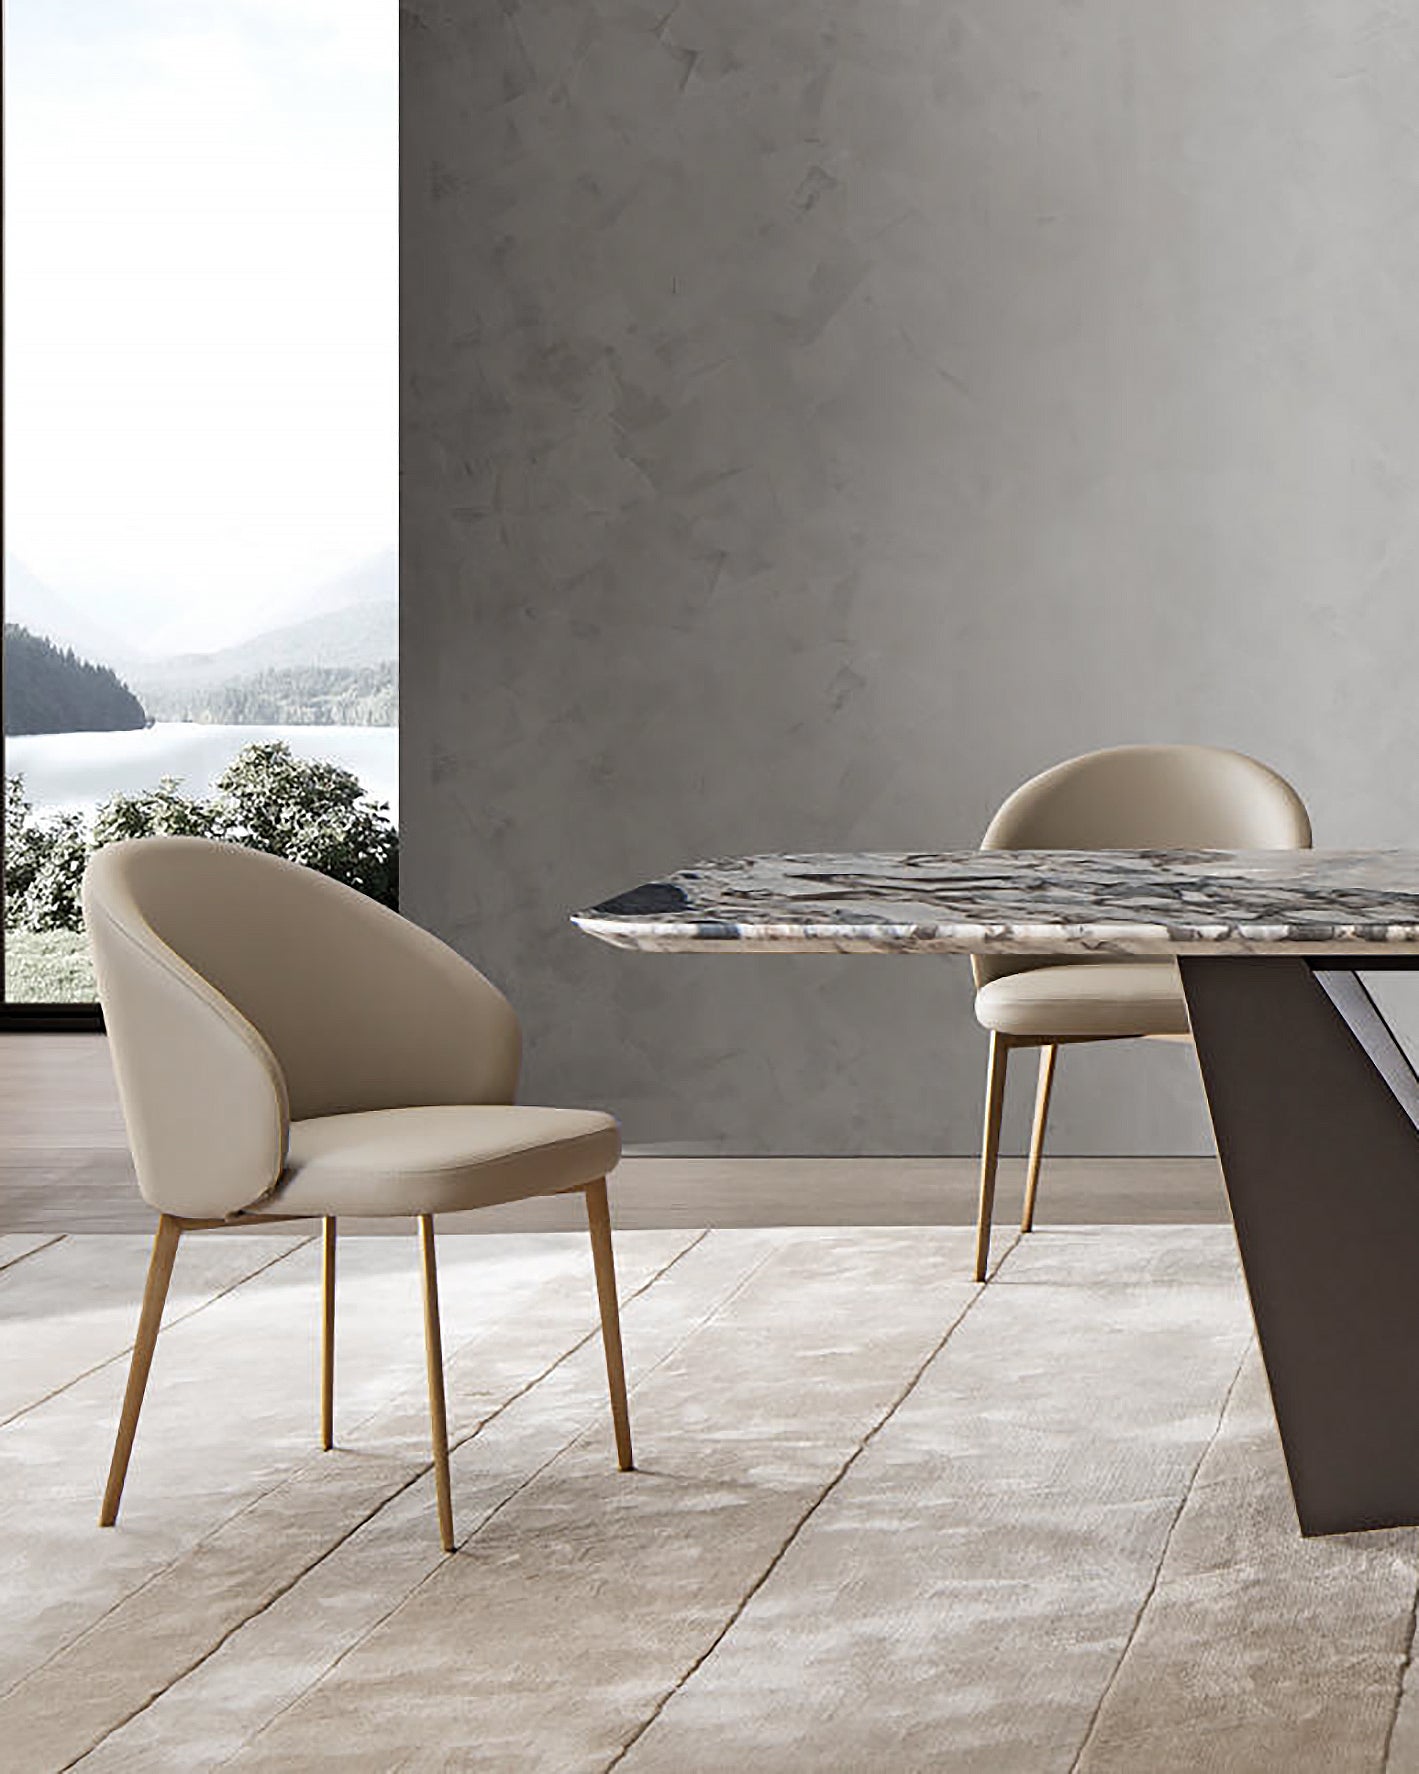 Dona Dining Chair